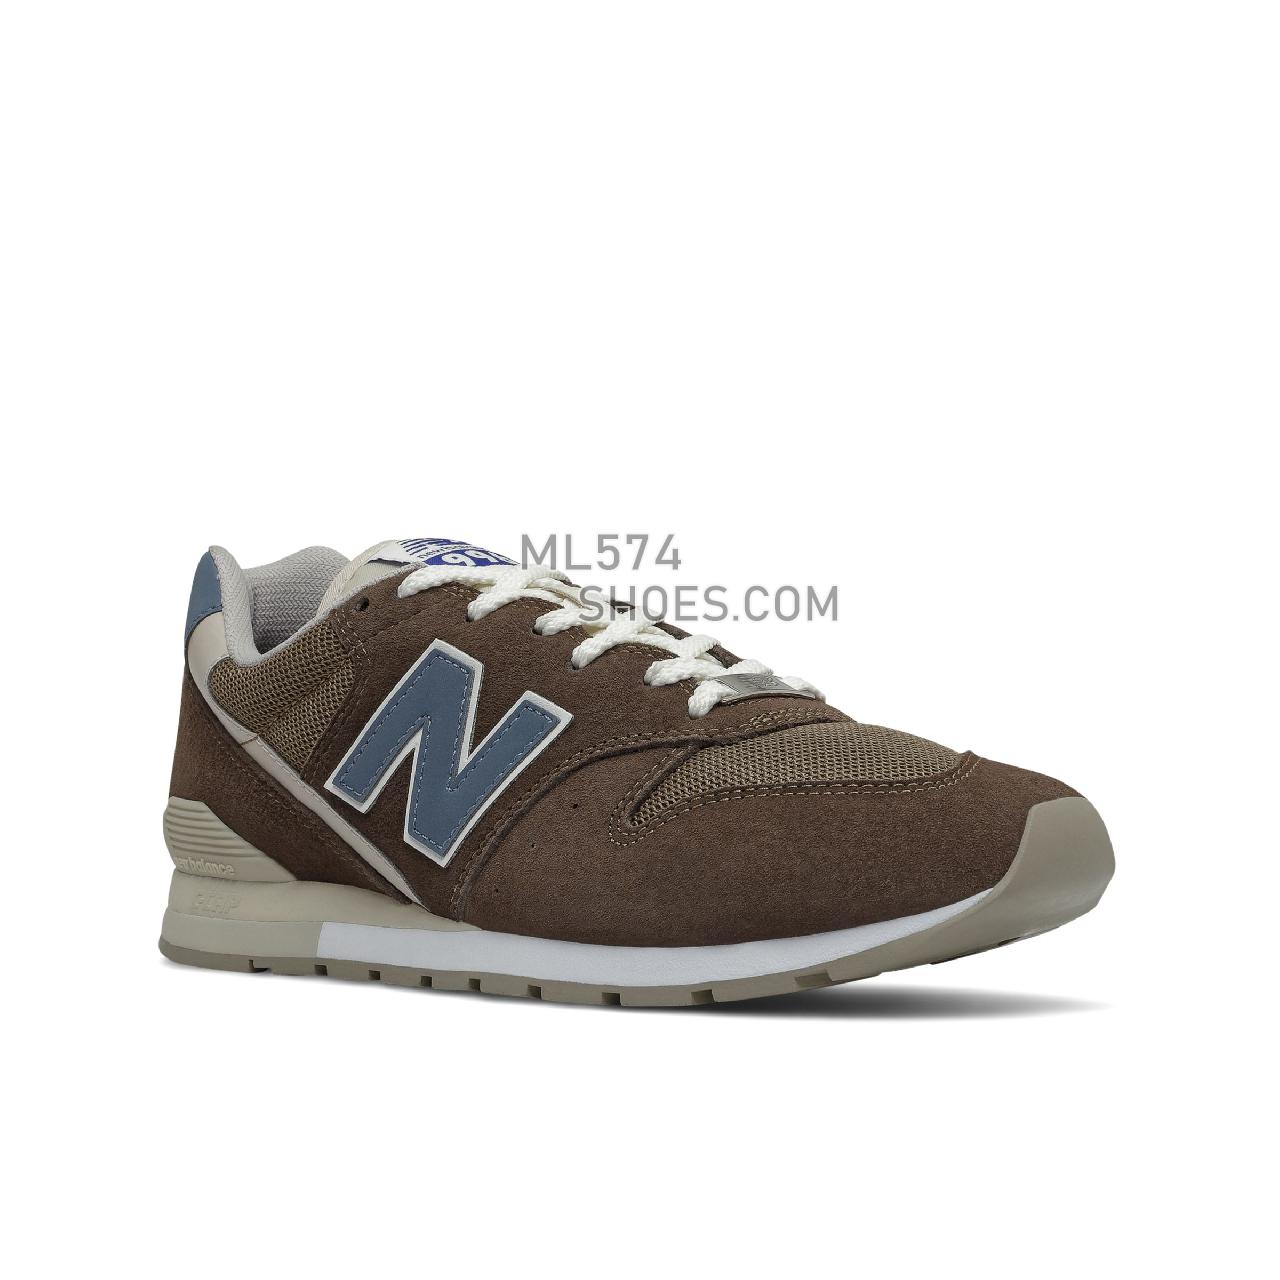 New Balance 996v2 - Men's Classic Sneakers - Black Coffee with Deep Porcelain Blue - CM996HR2